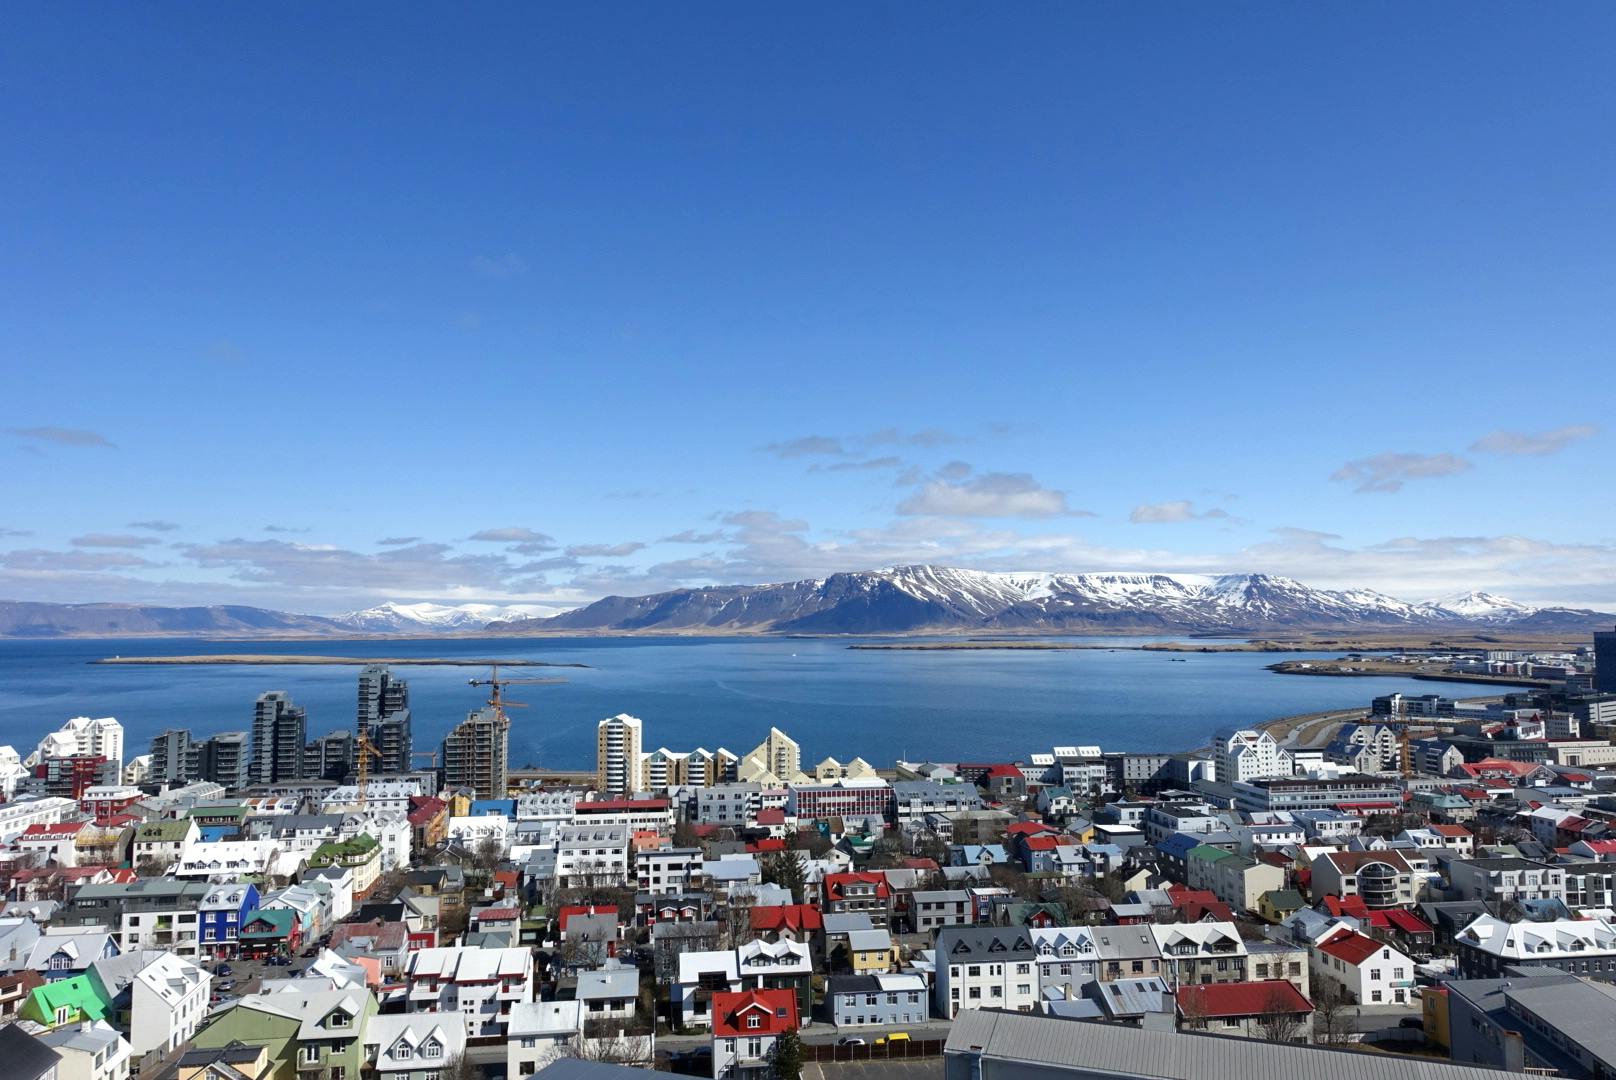 Reykjavík' mountain horizon is an ever-present delight in the northernmost capital of the world.